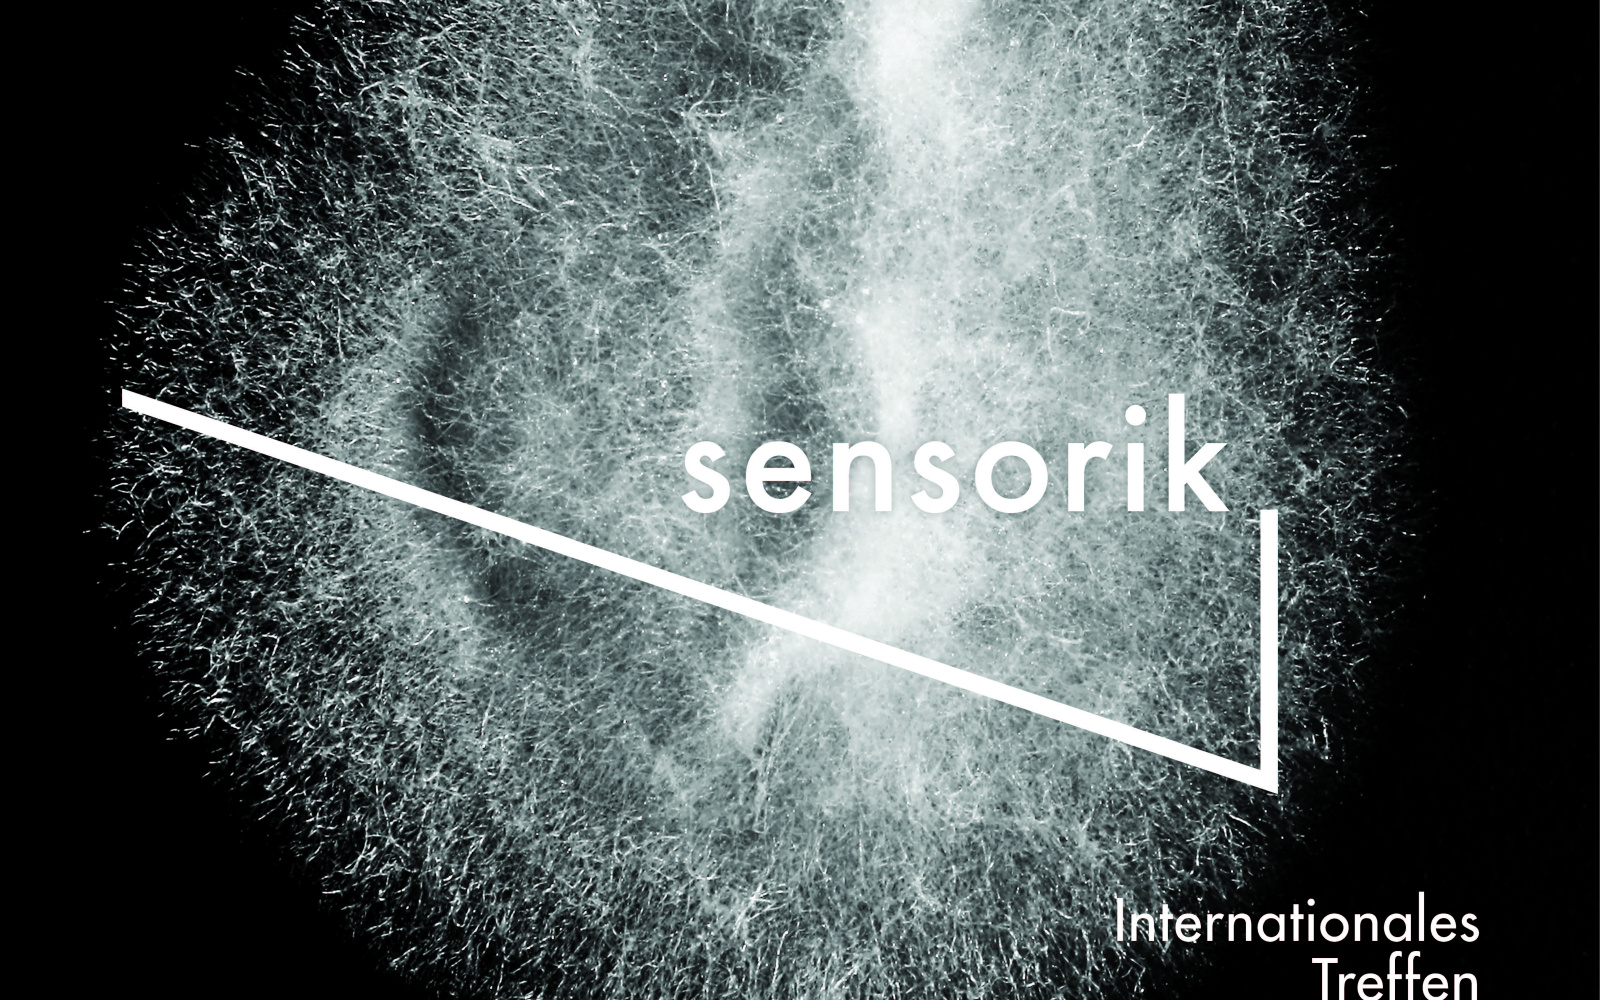 The picture shows the poster for the international meeting of electronic university studios, "next_generation 7.0.SENSORIK"